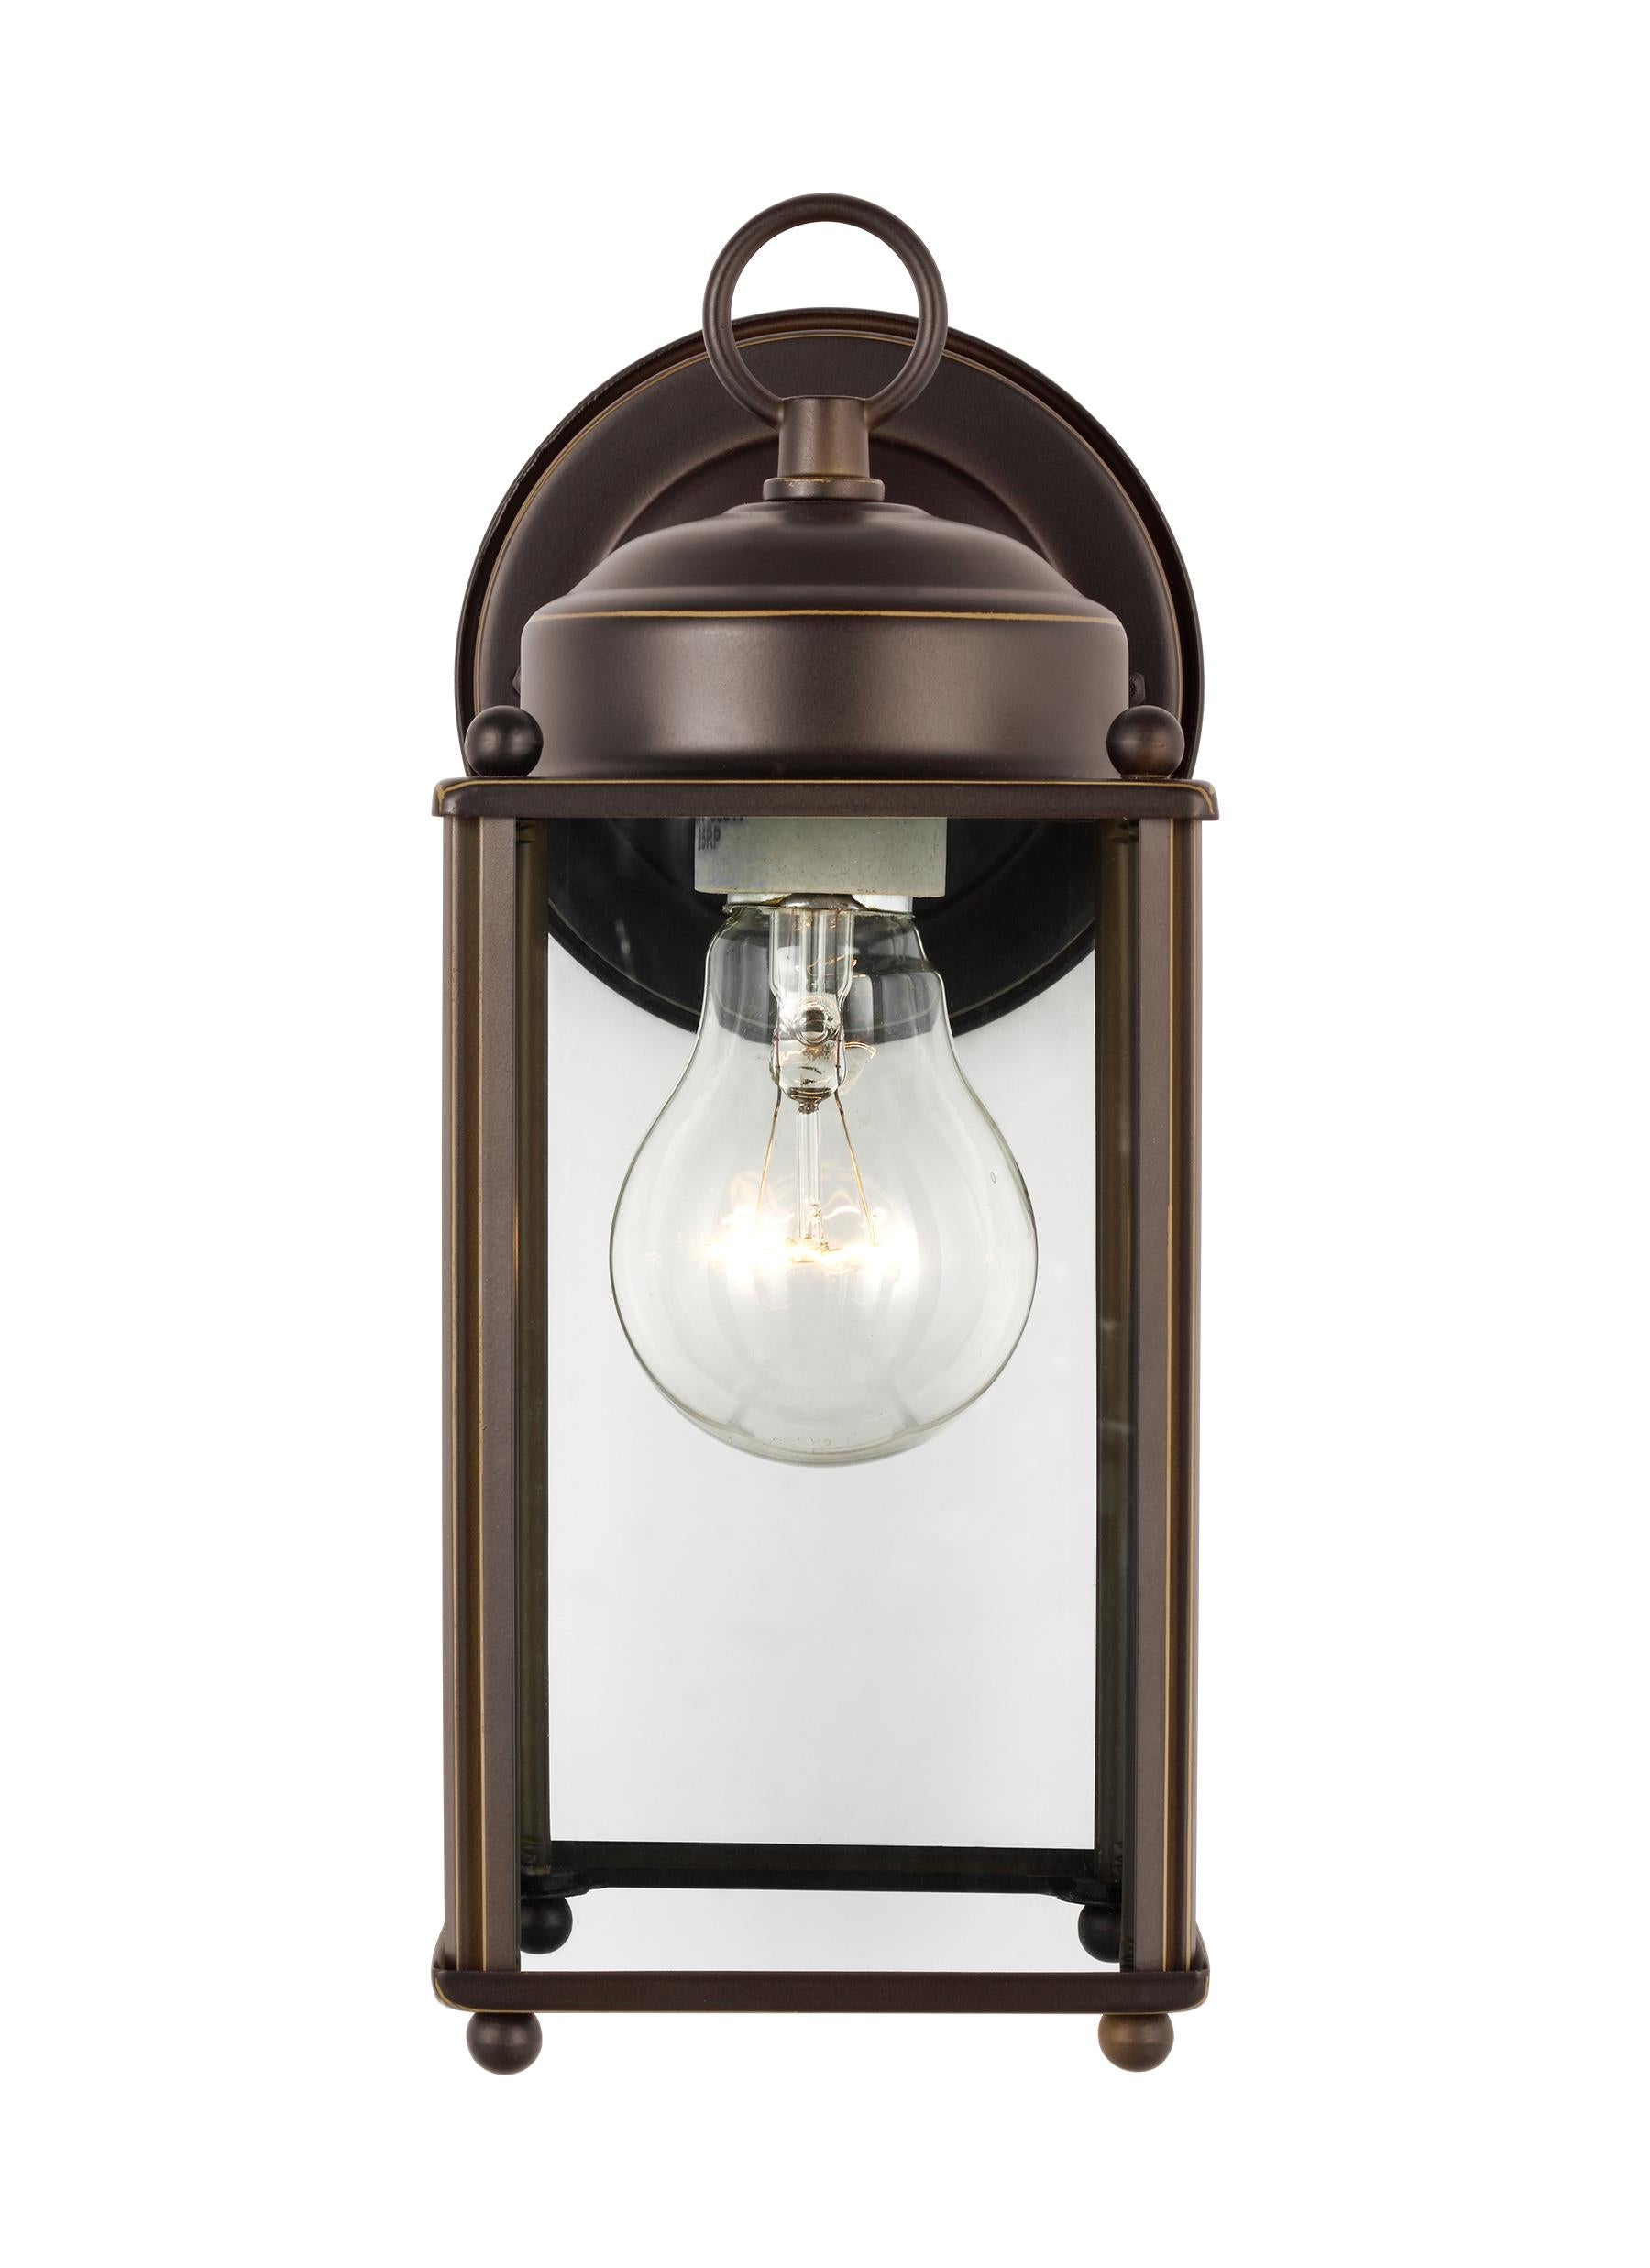 New Castle traditional 1-light outdoor exterior large wall lantern sconce in antique bronze finish with clear glass panels